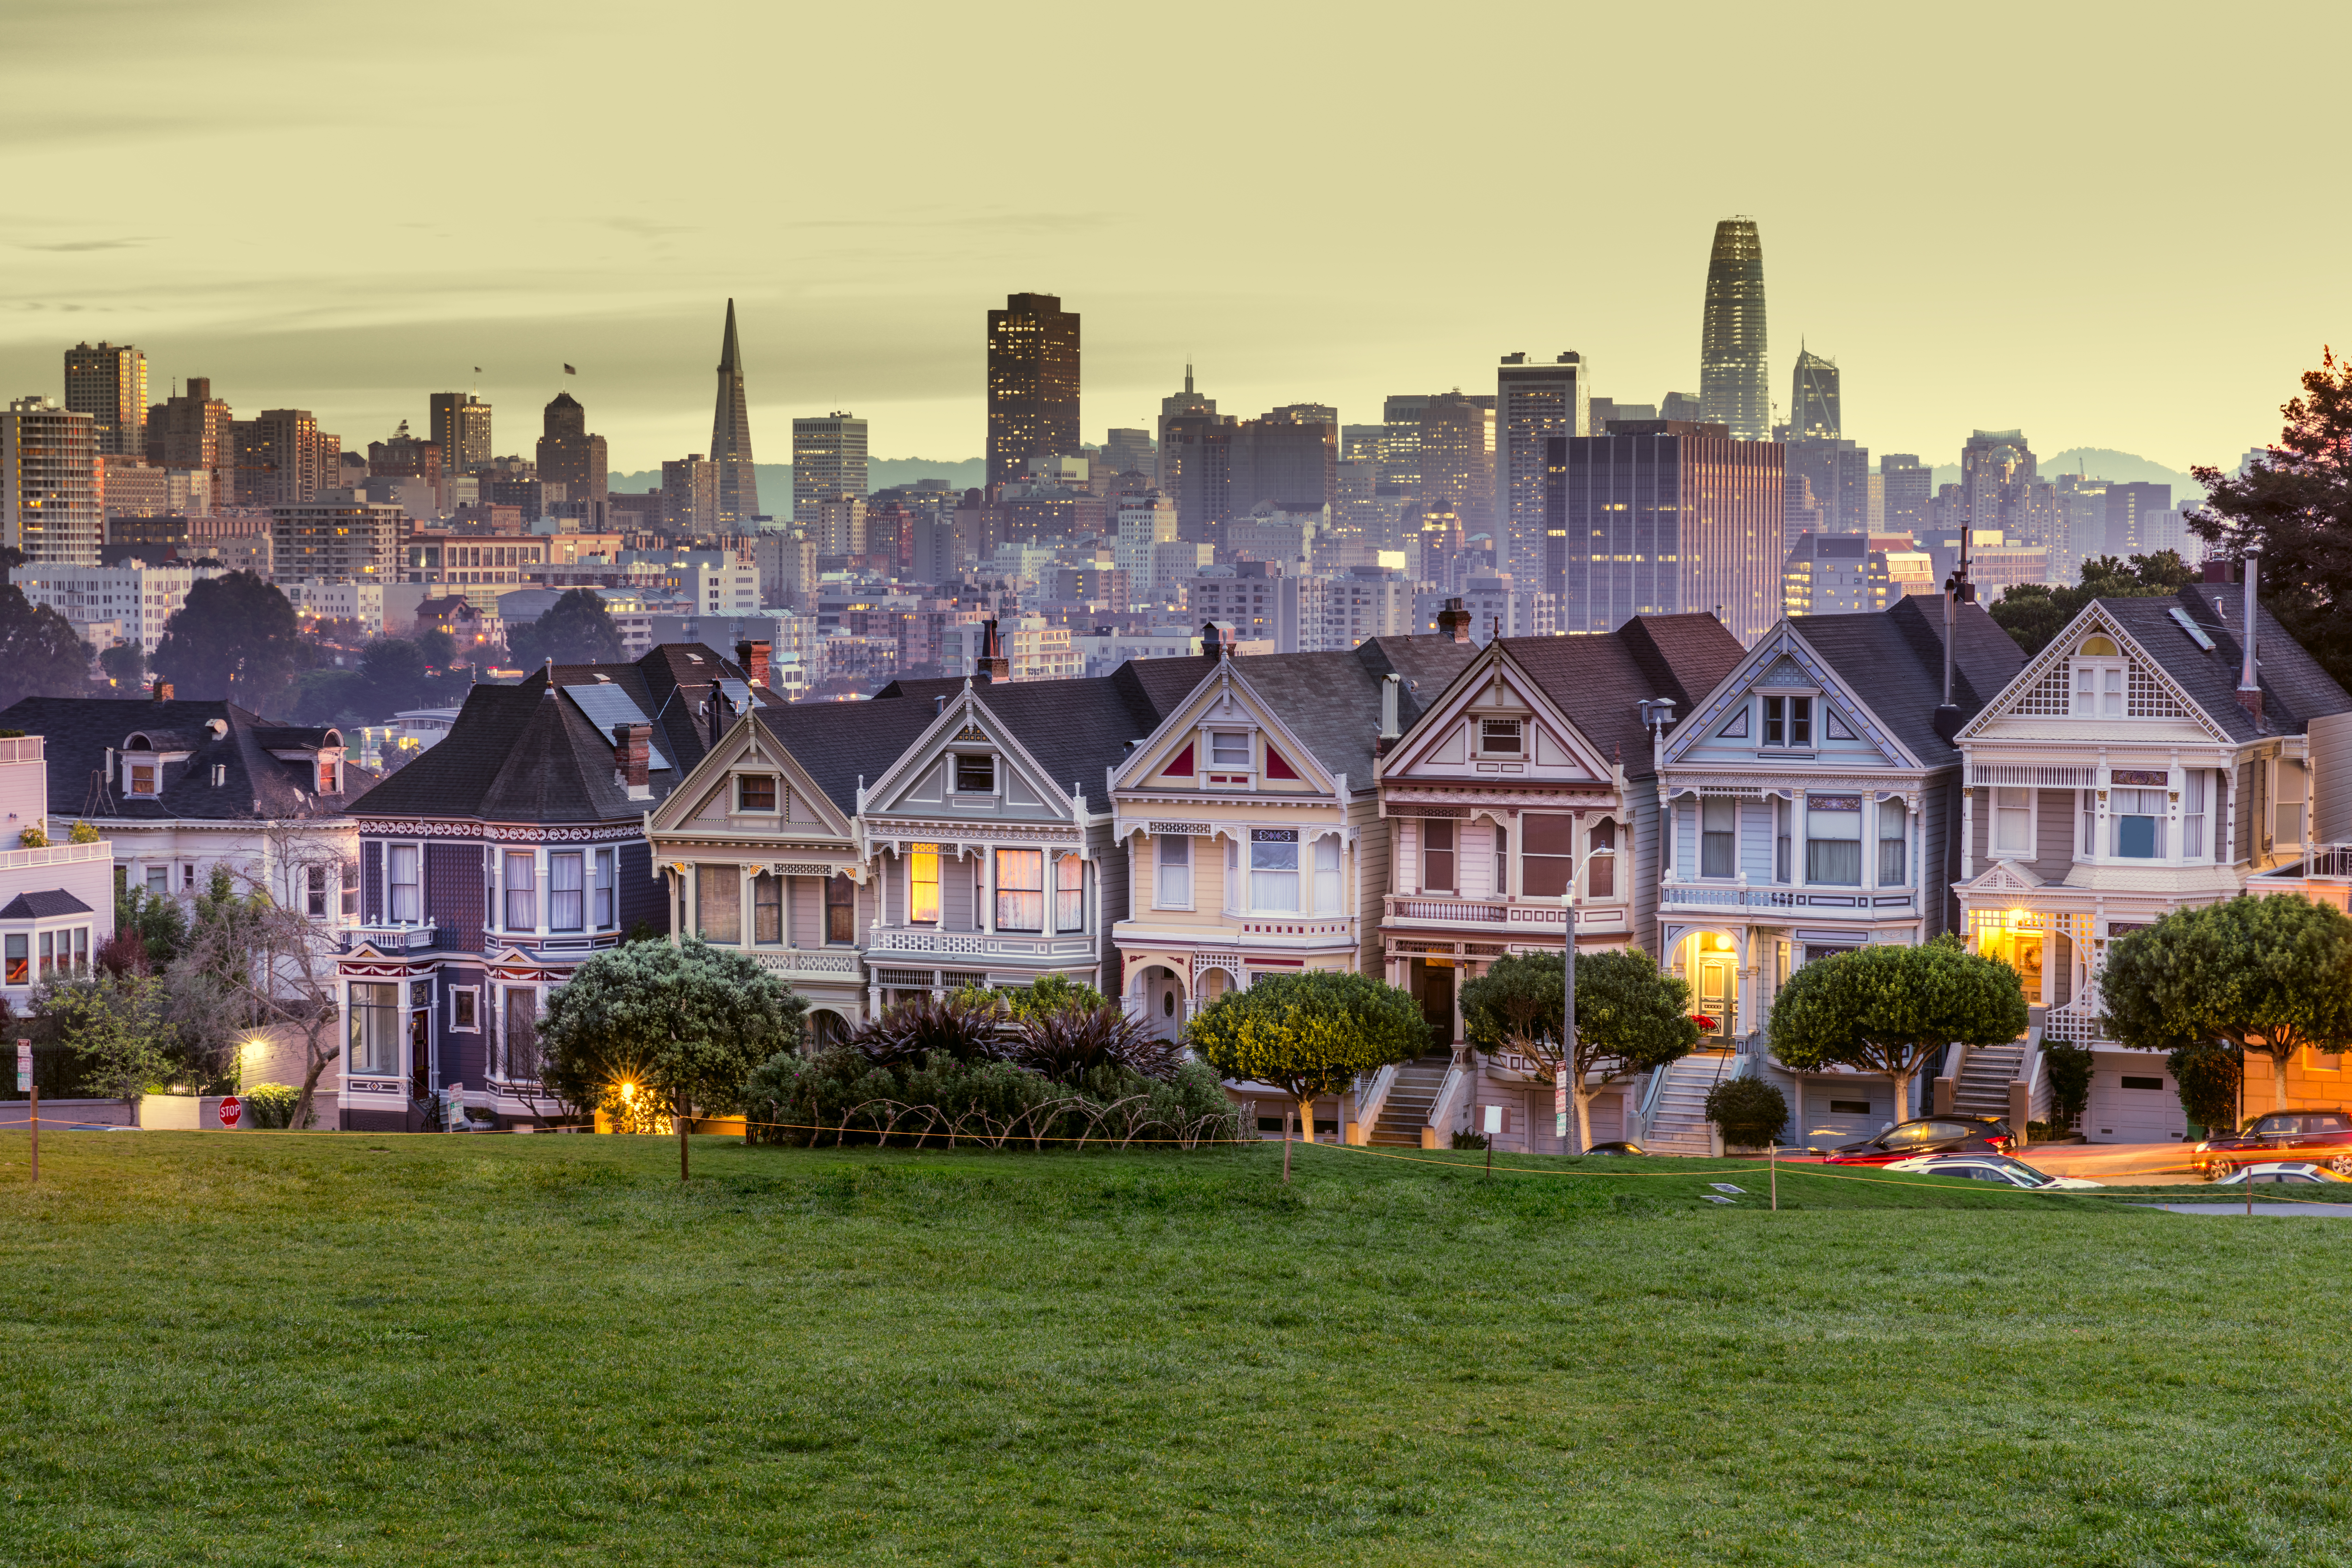 San Francisco's Alamo Square and Painted Ladies